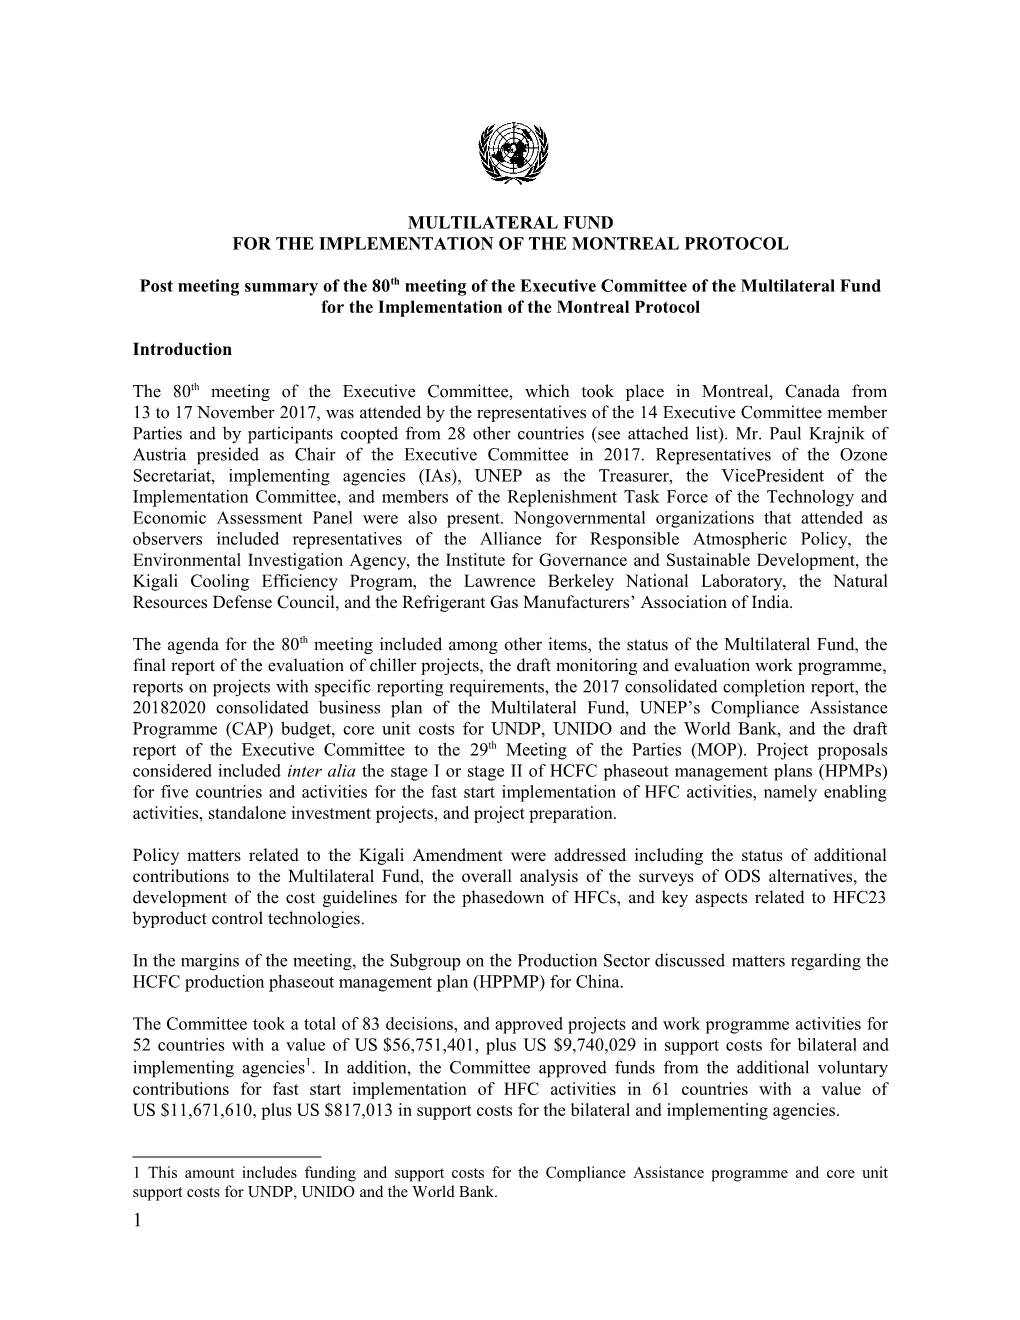 Post Meeting Summary of the 78Th Meeting of the Executive Committee of the Multilateral